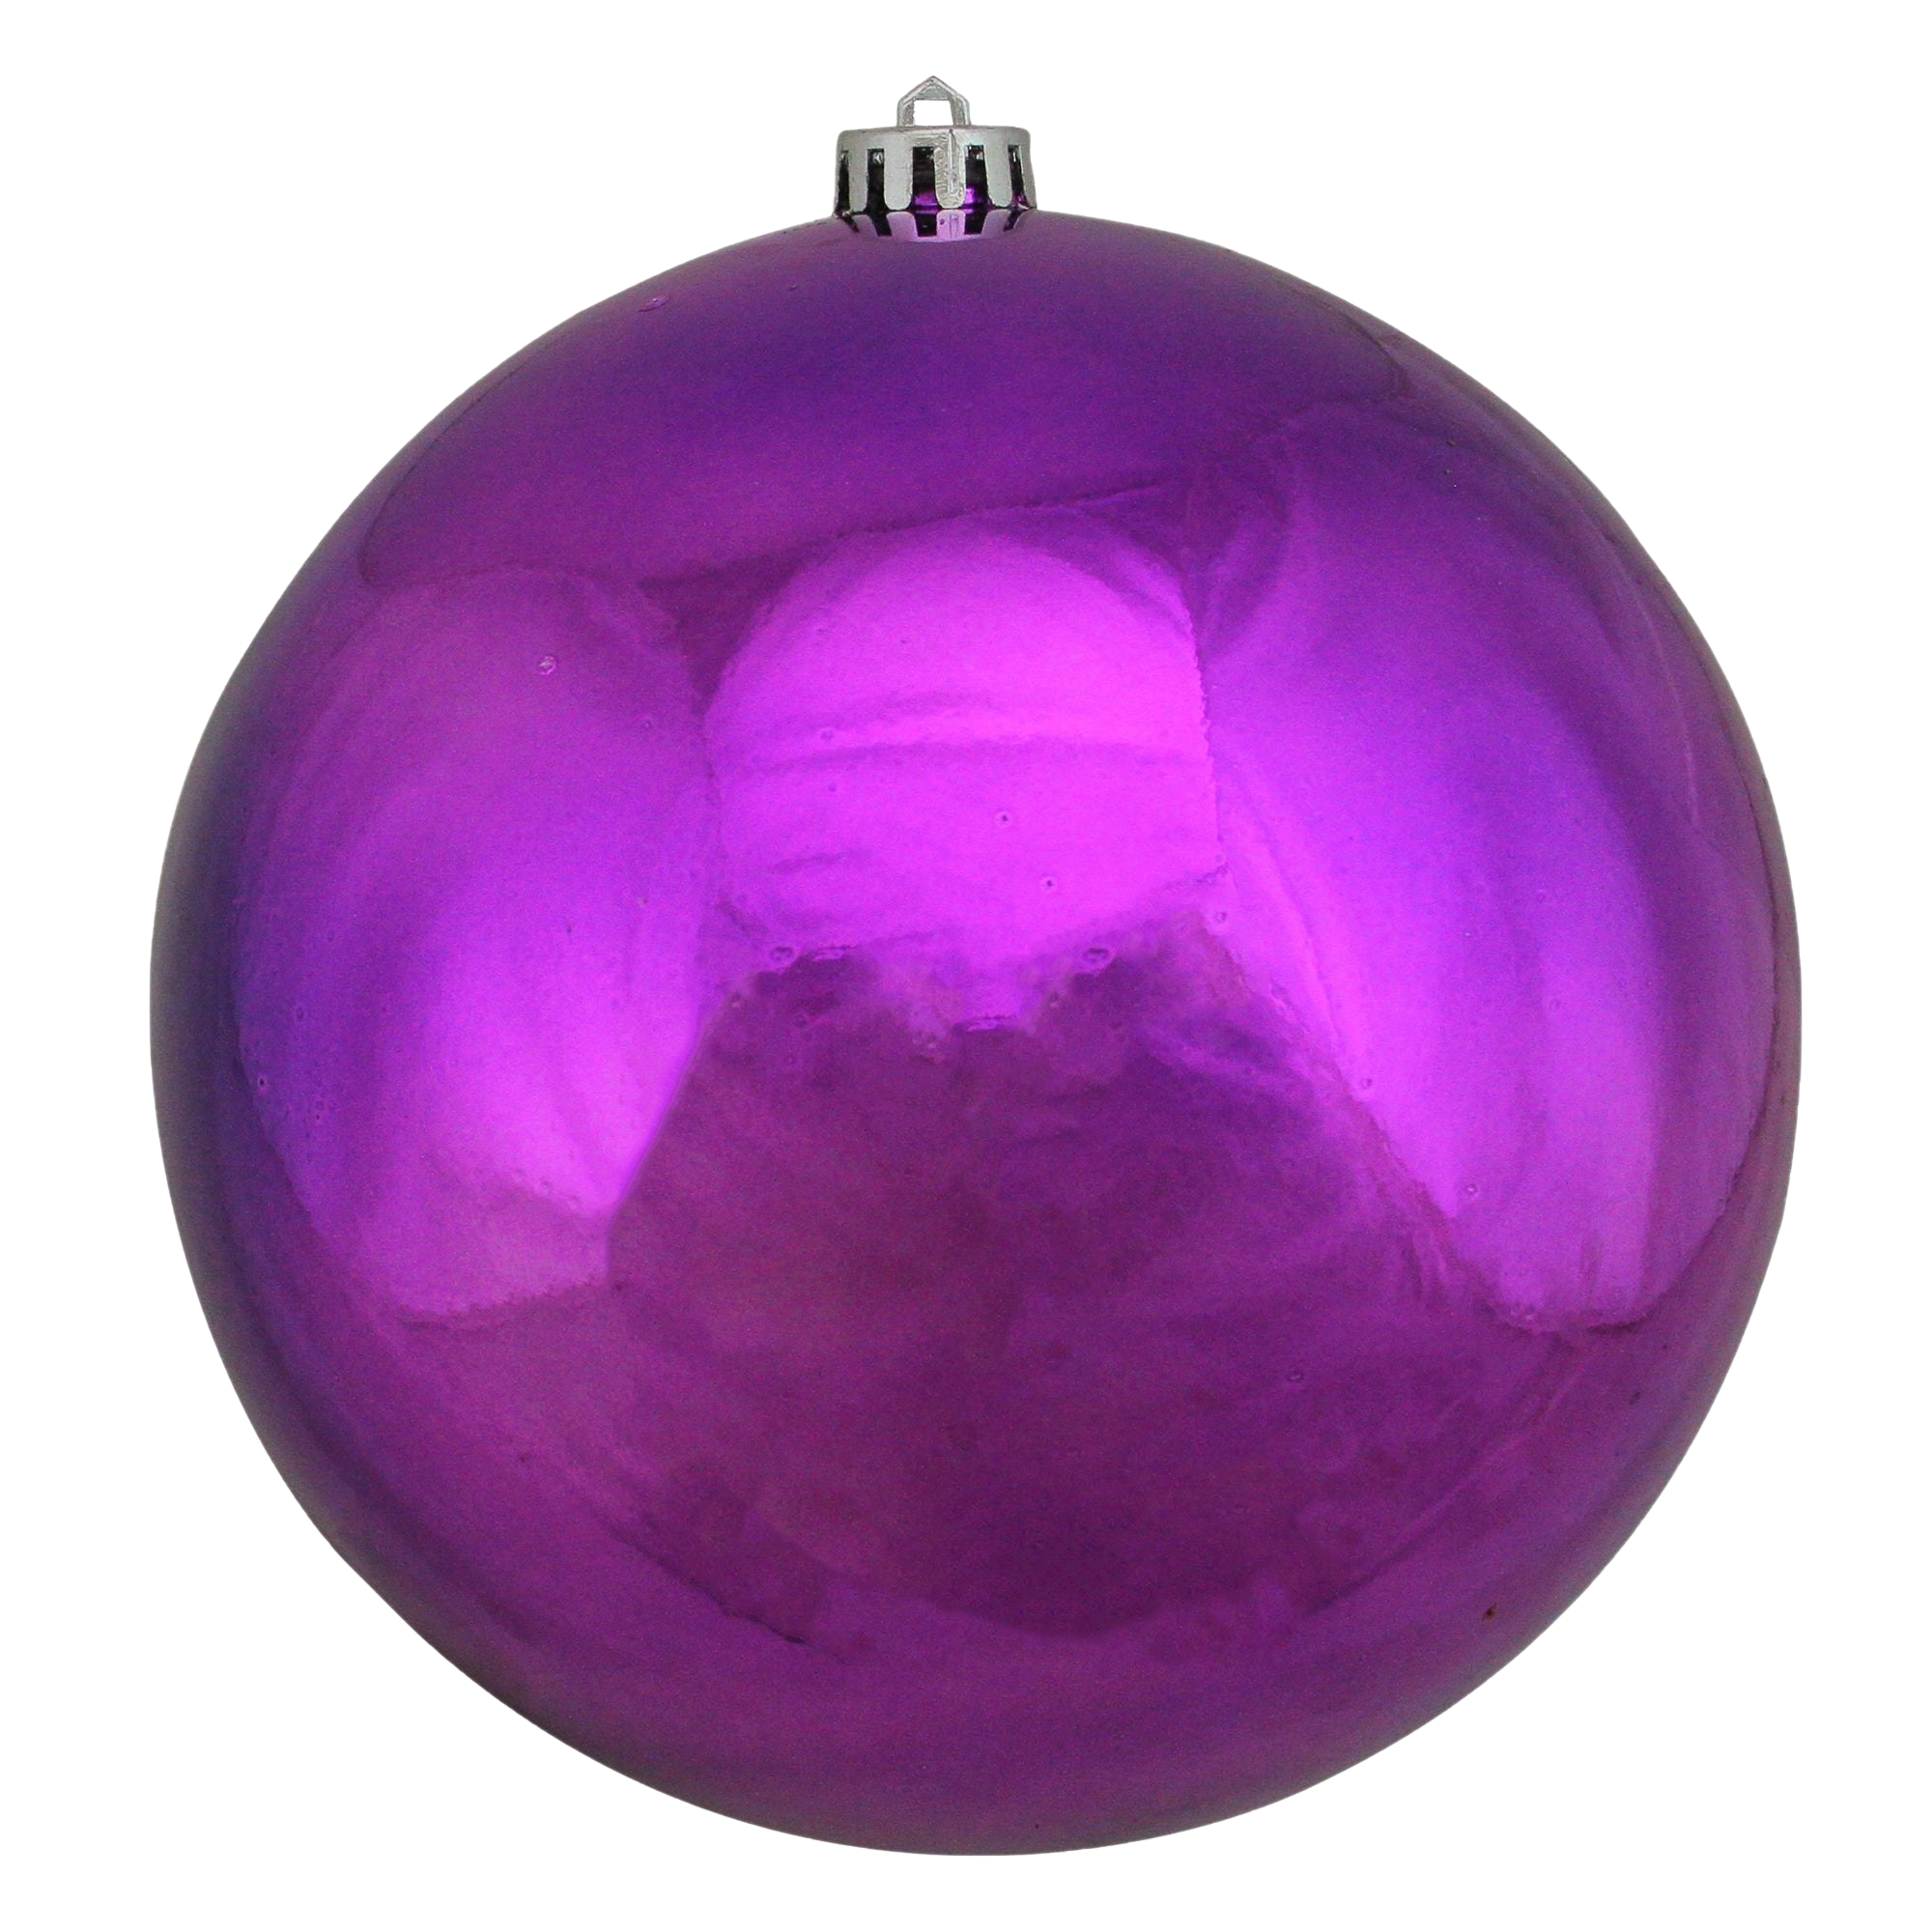 Download PNG image - Single Purple Christmas Ball PNG Clipart 